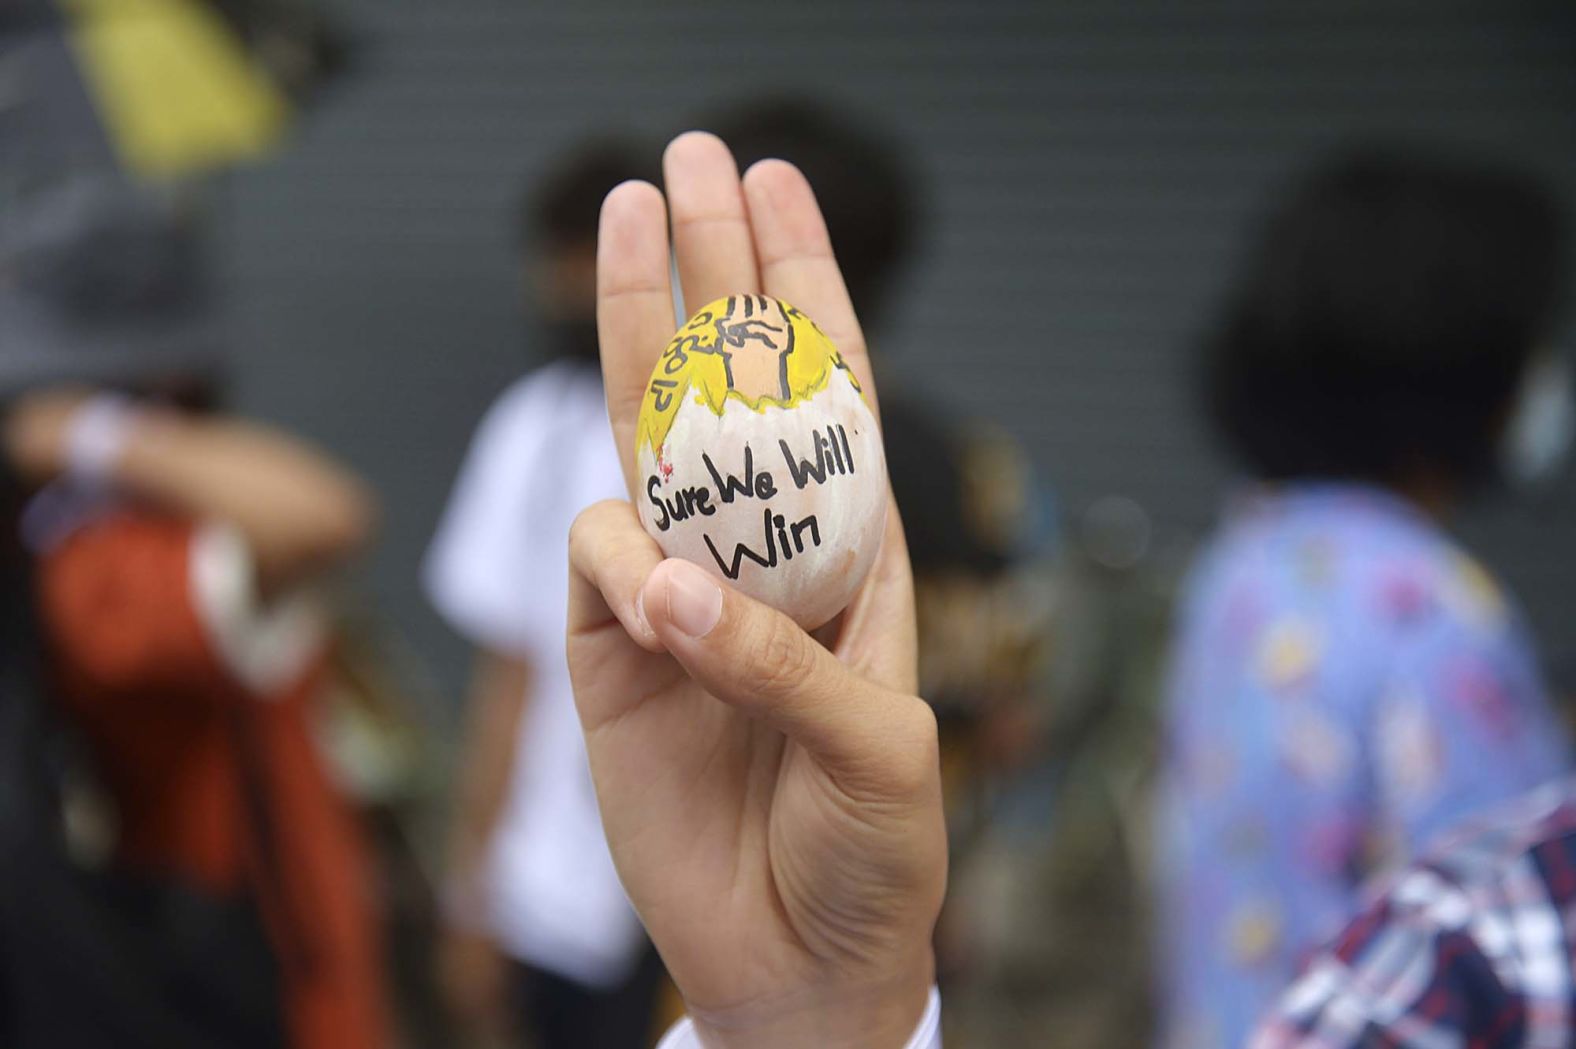 An anti-coup protester raises a decorated Easter egg along with the three-fingered salute of resistance during a demonstration in Yangon on April 4.